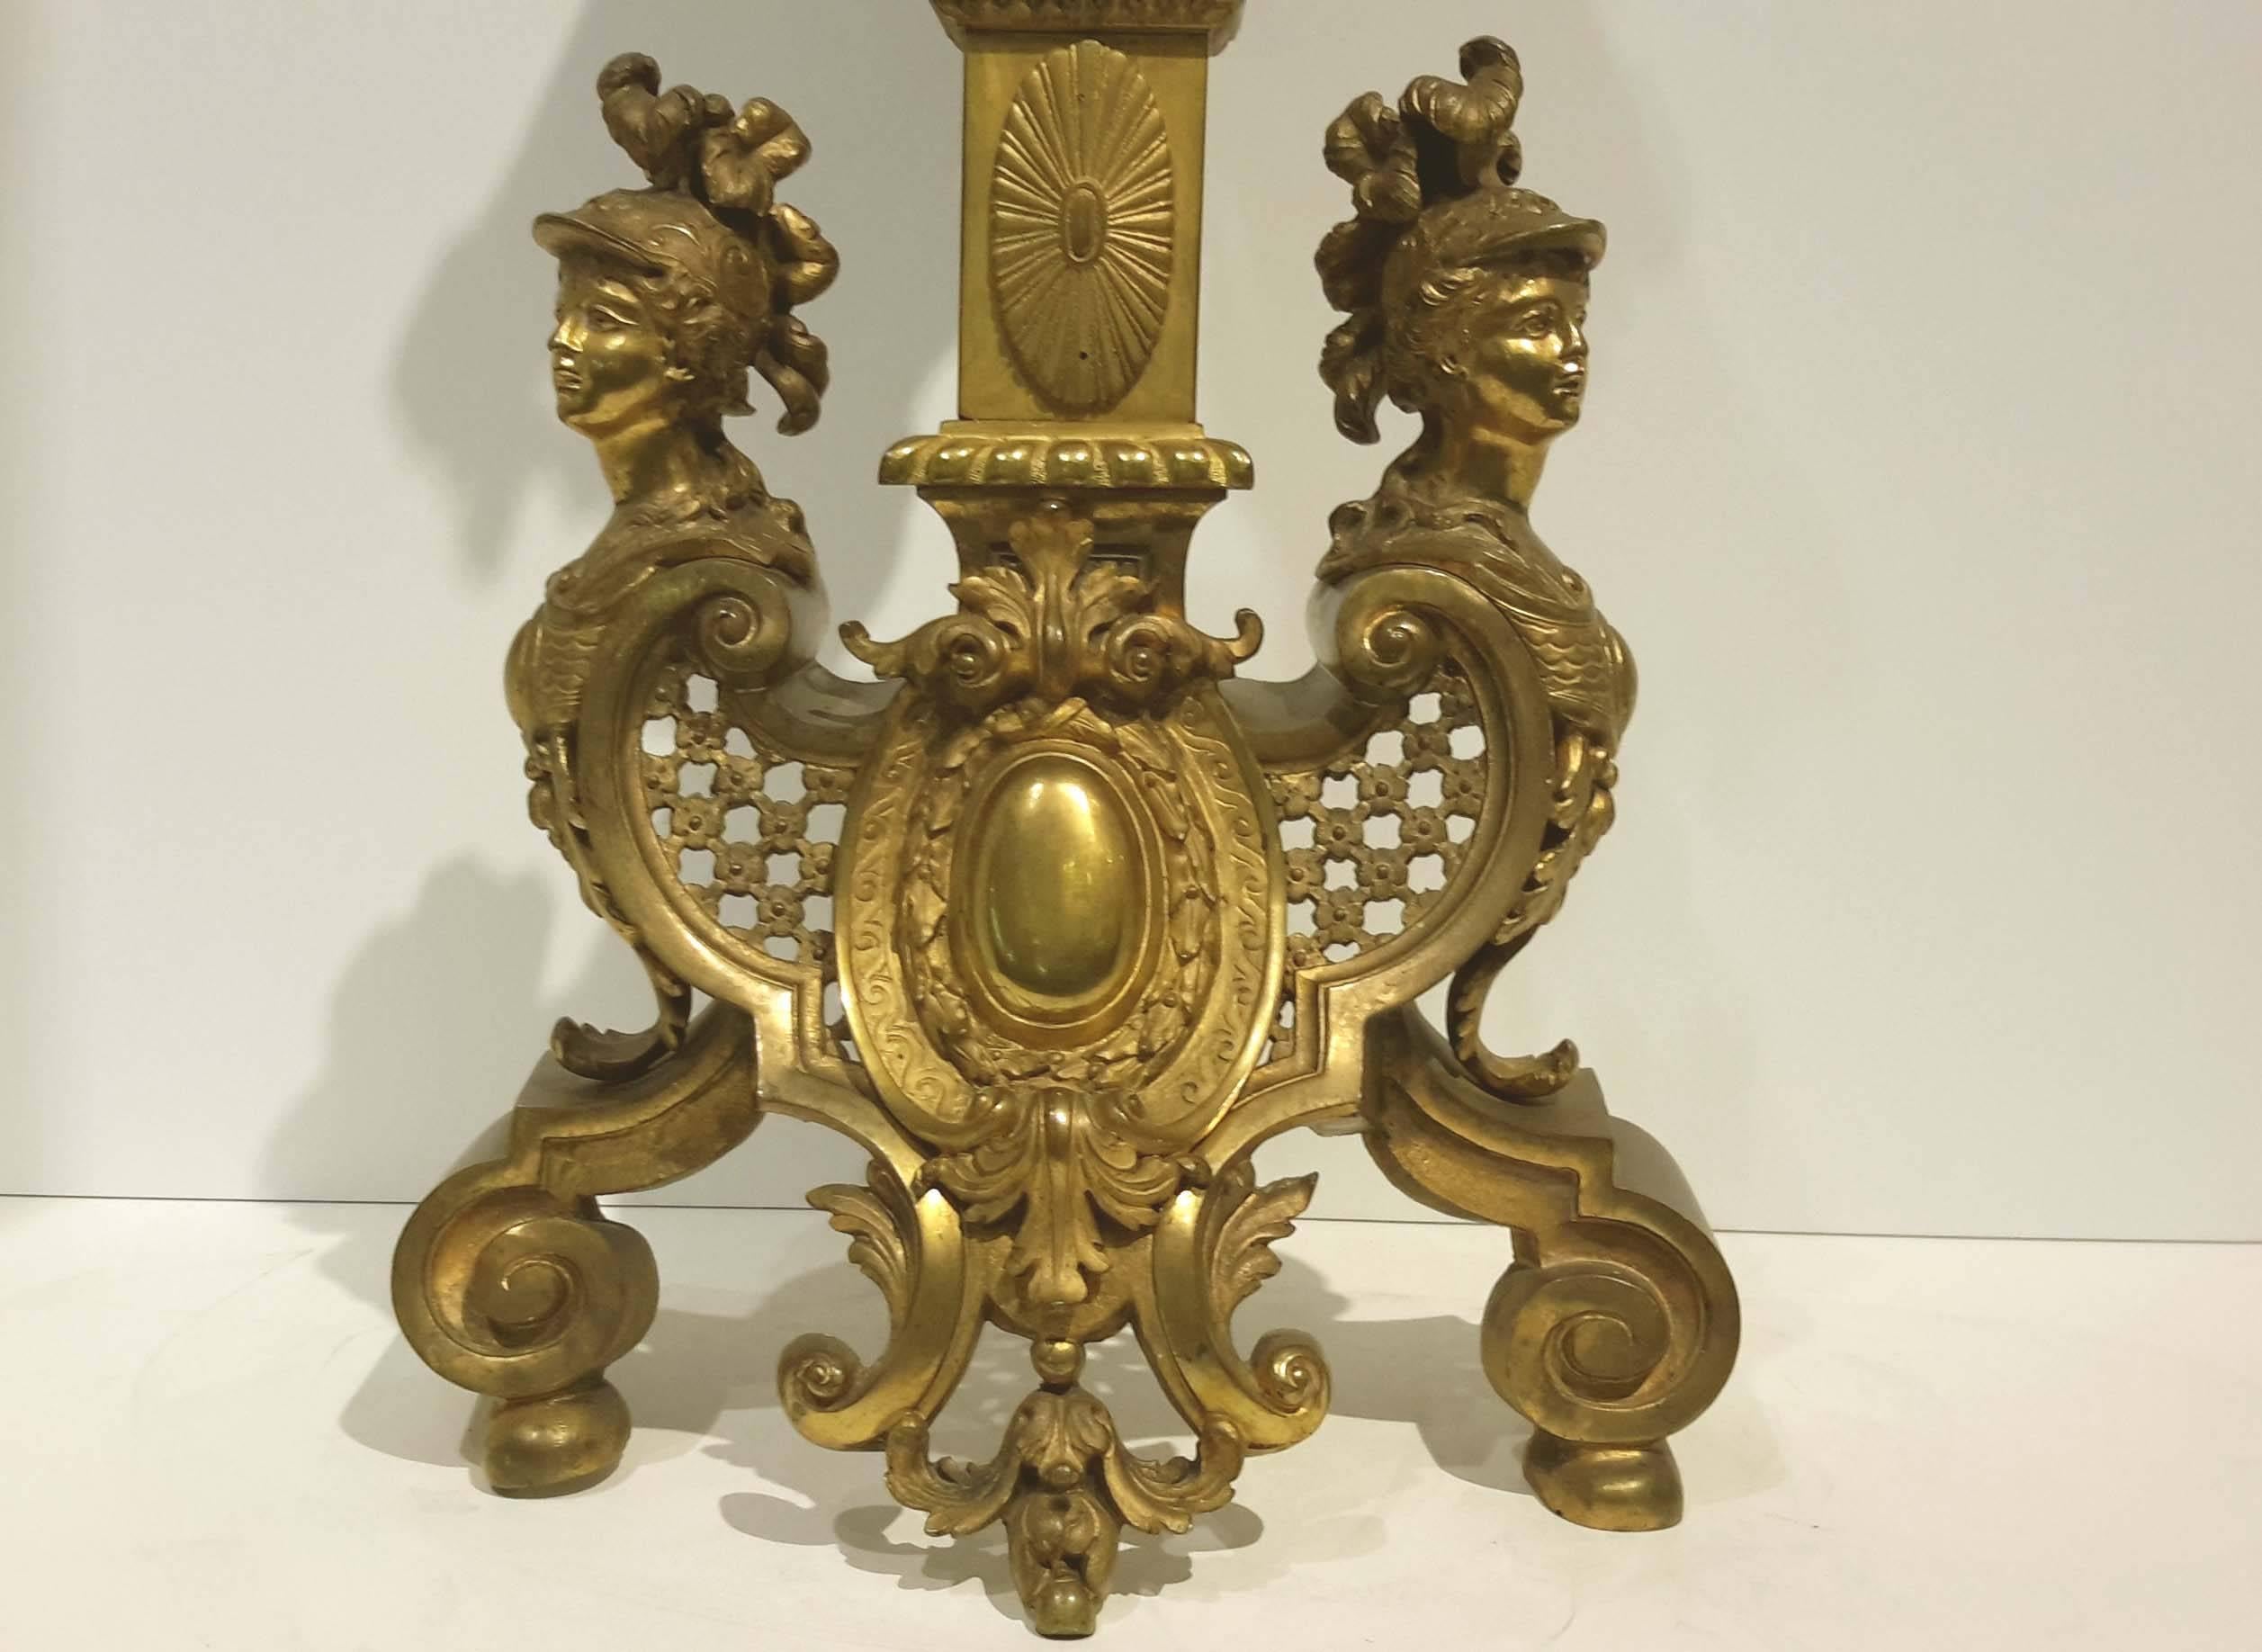 Pair of figural cast and gilt bronze 19th century French chenets/andirons.
Minor ware to gilding, otherwise in good condition.